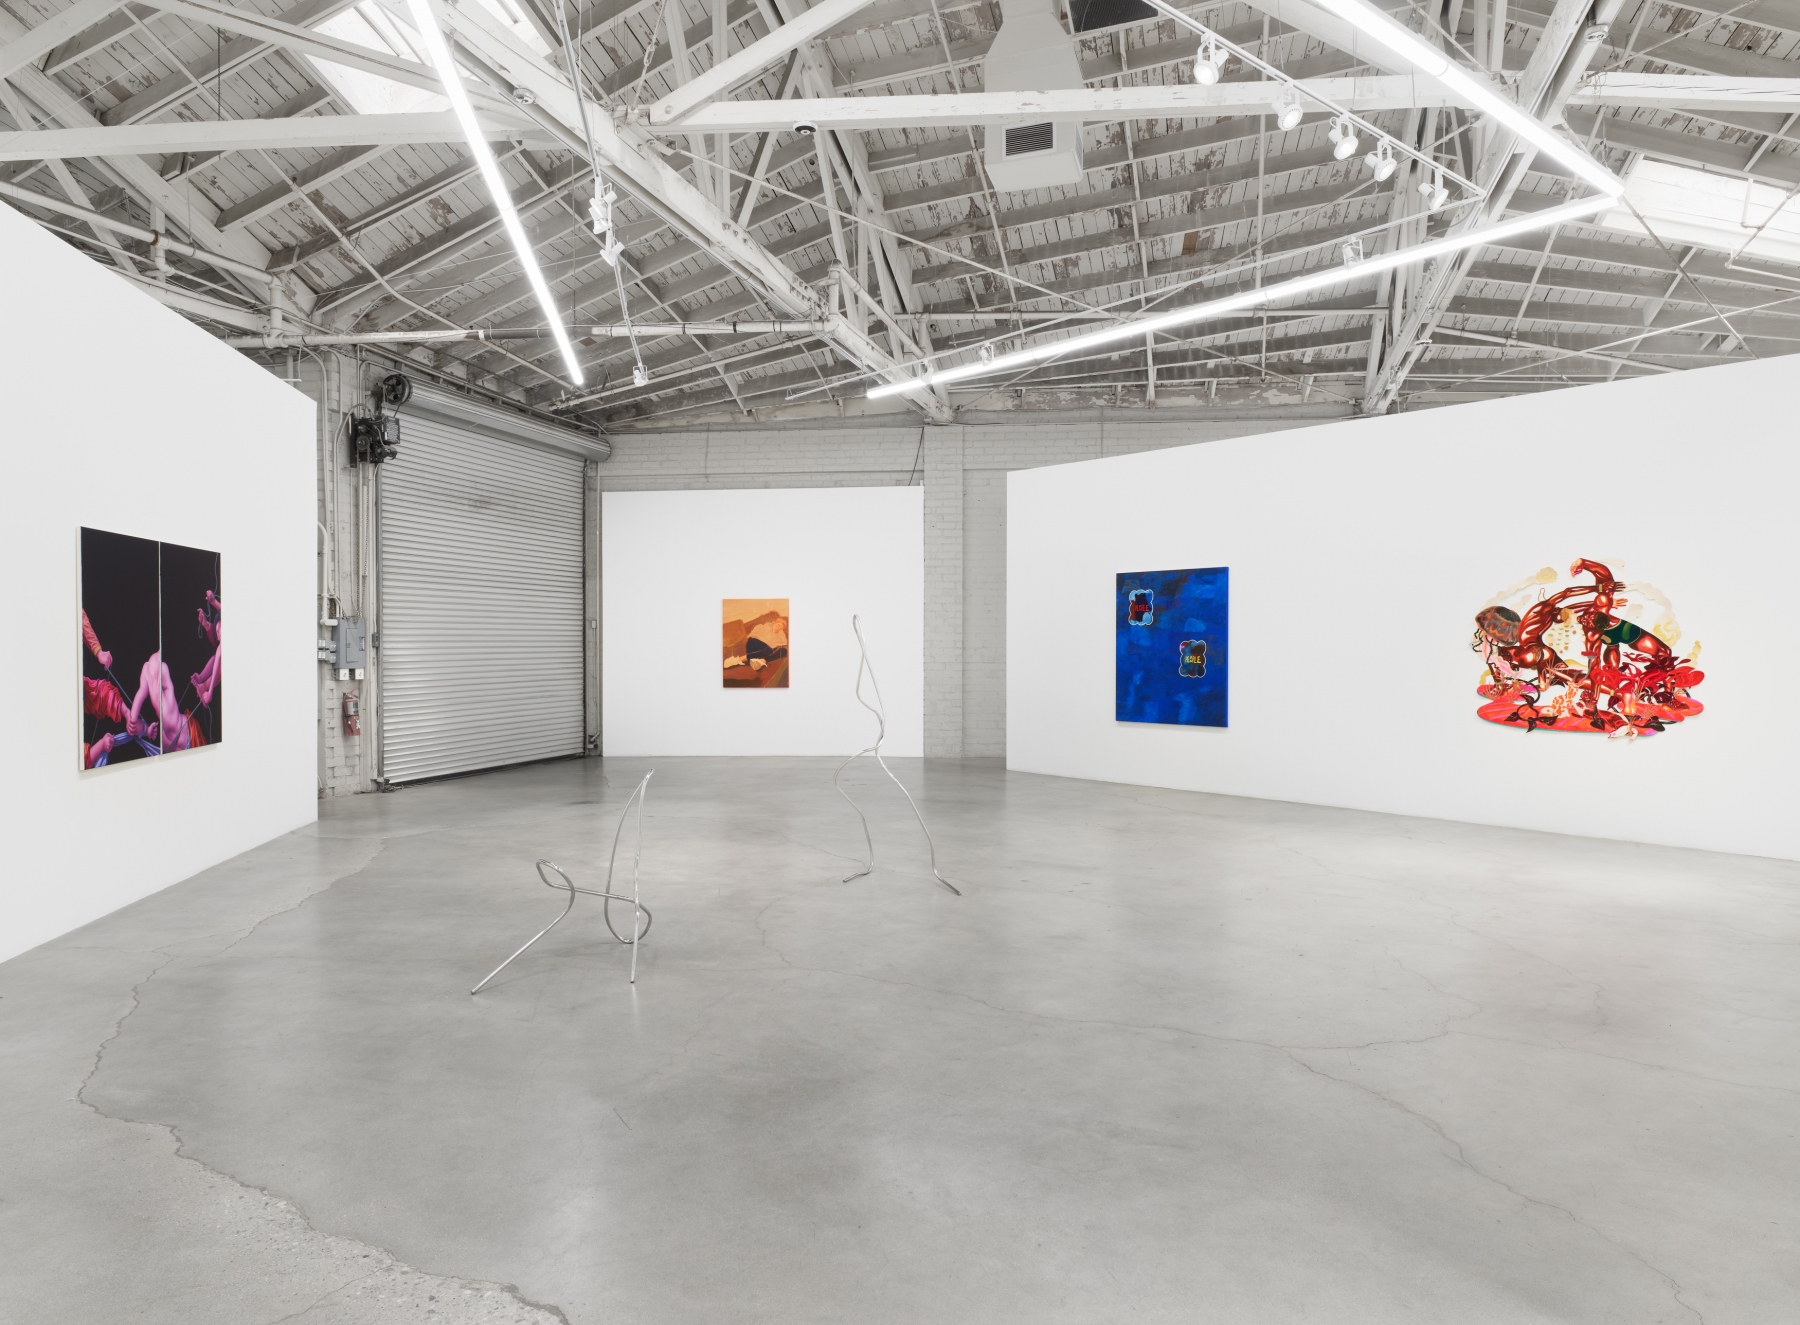 Installation view of Majeure Force, Part Two, featuring works by Jesse Mockrin, Josh Callaghan, Claire Tabouret, Marisa Takal, and Khari Johnson-Ricks. 